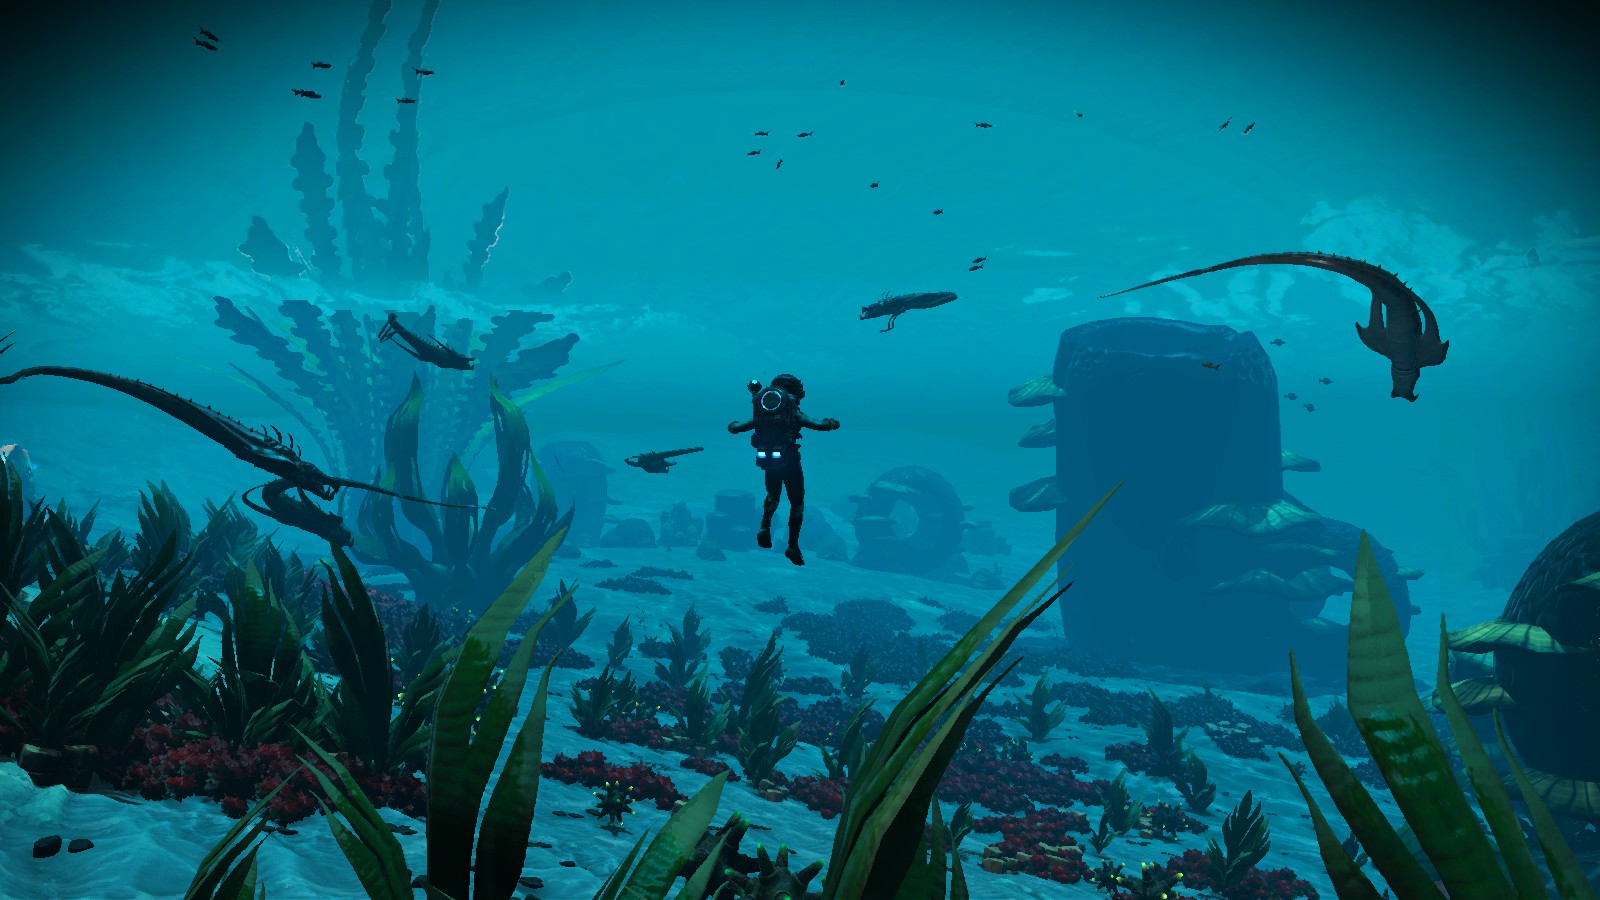 Explorer in Exosuit floating in the water, withd alien aquatic animals swiming nearby